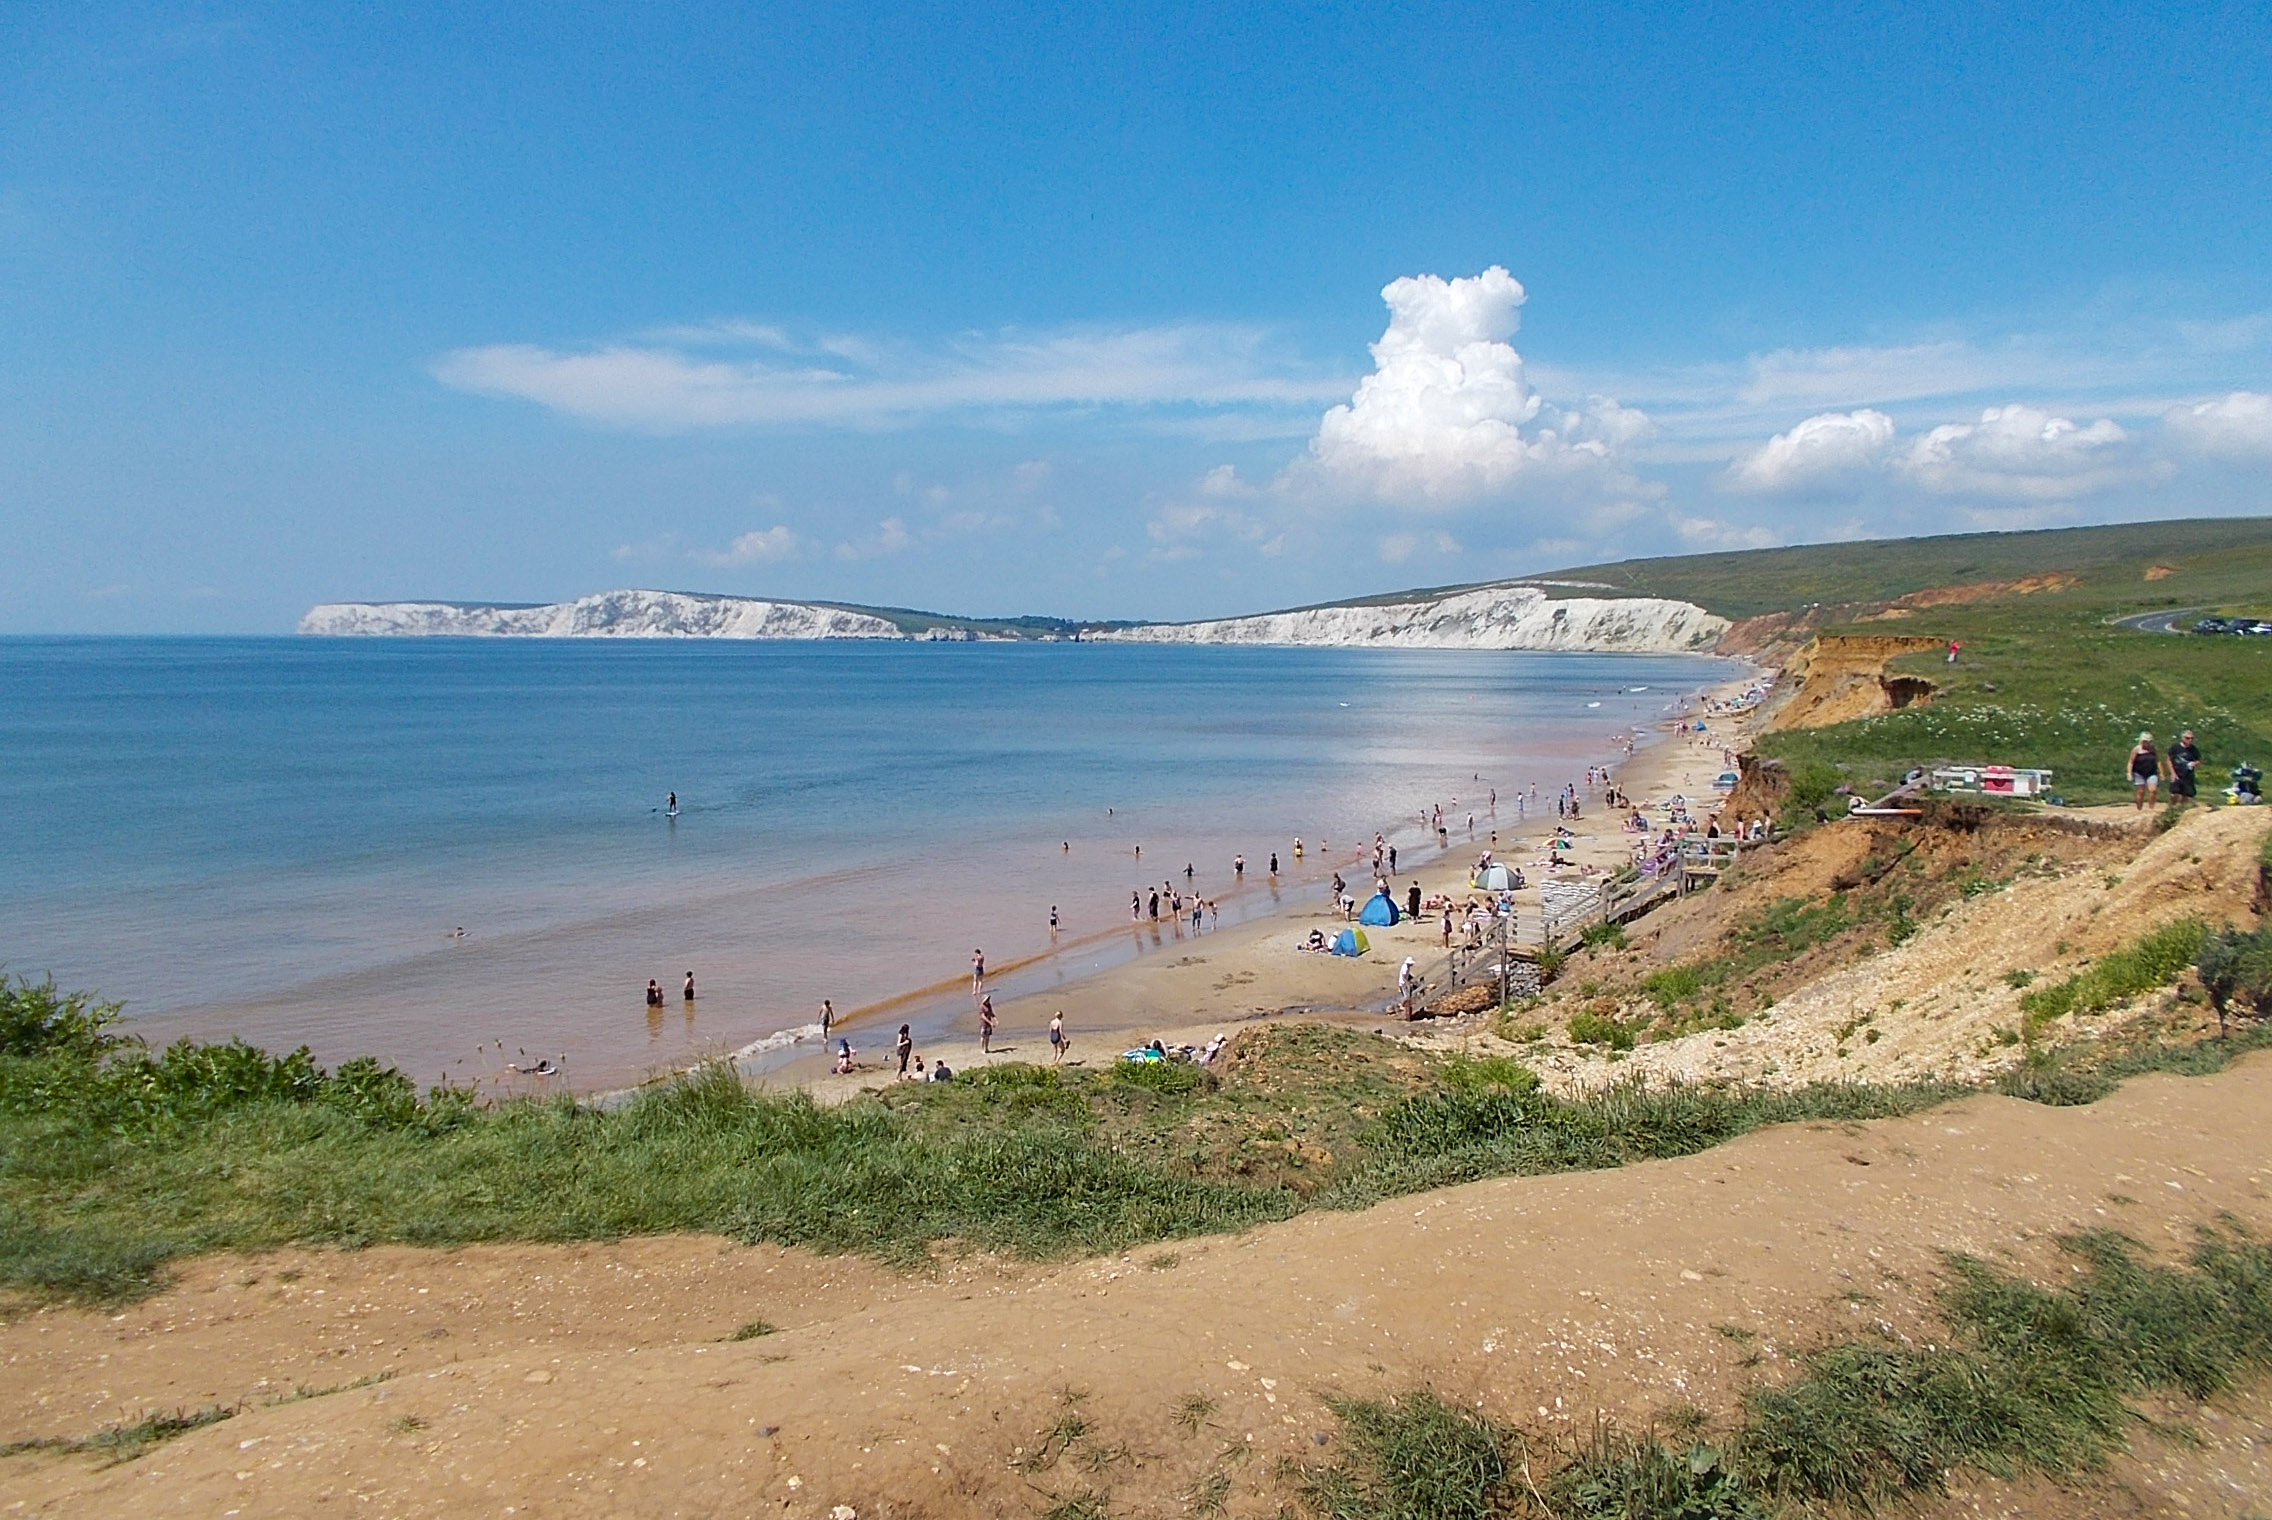 Compton Bay © Mypix - licence [CC BY-SA 4.0] from Wikimedia Commons